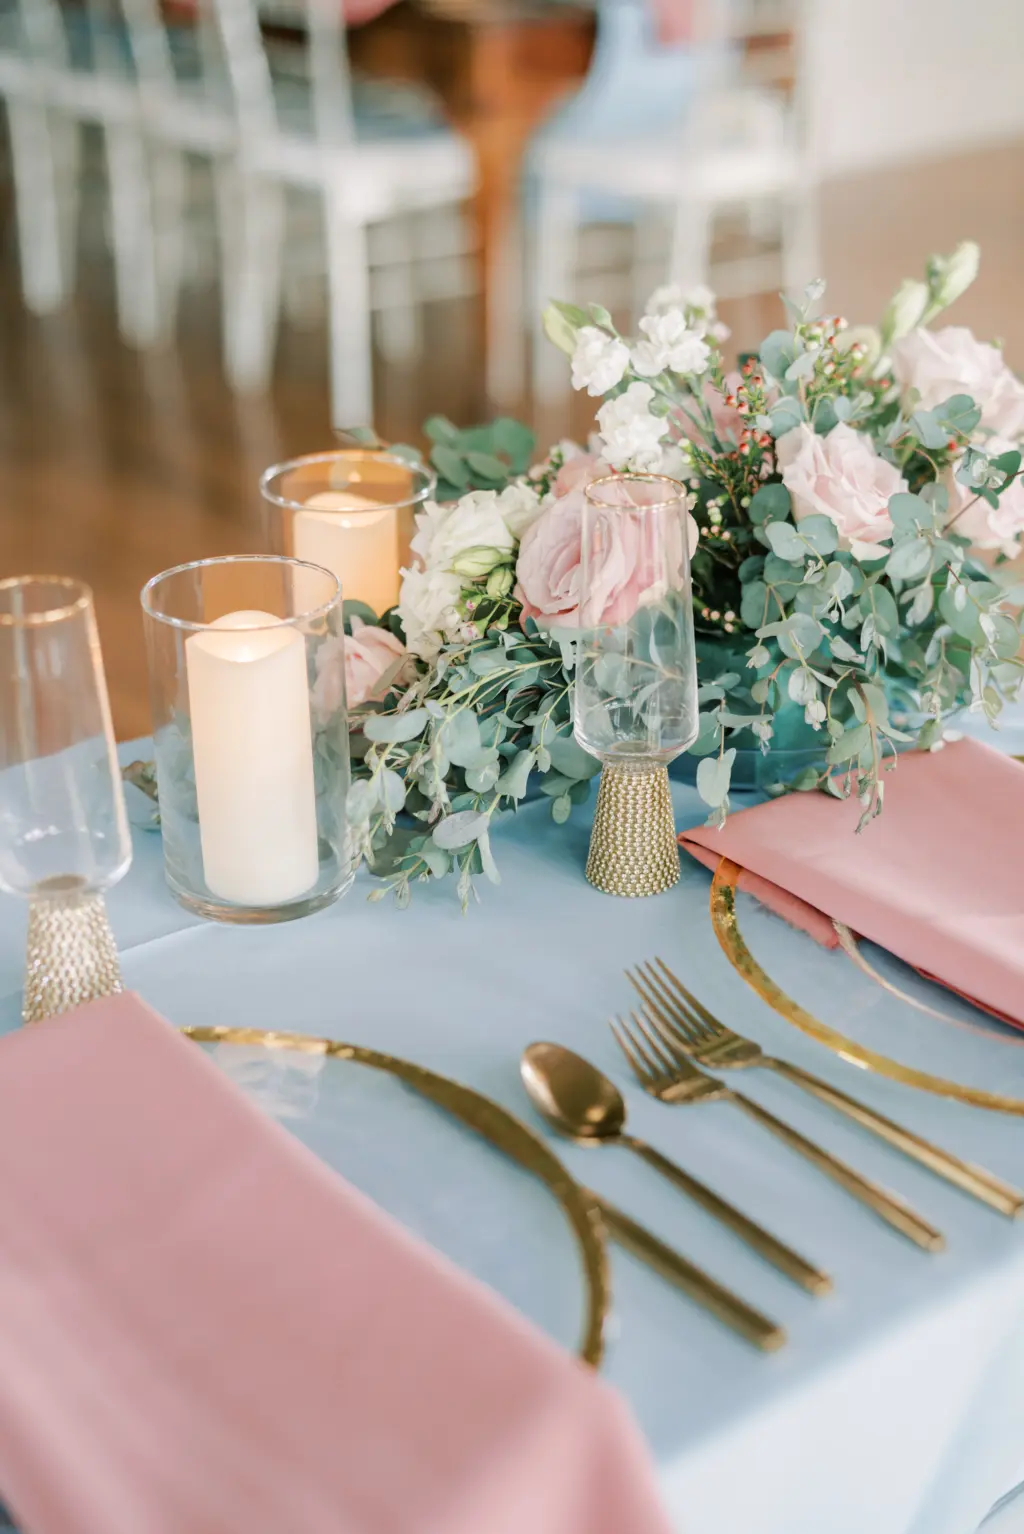 Dusty Blue and Pink Wedding Reception Inspiration | Tampa Bay Rental Company A Chair Affair